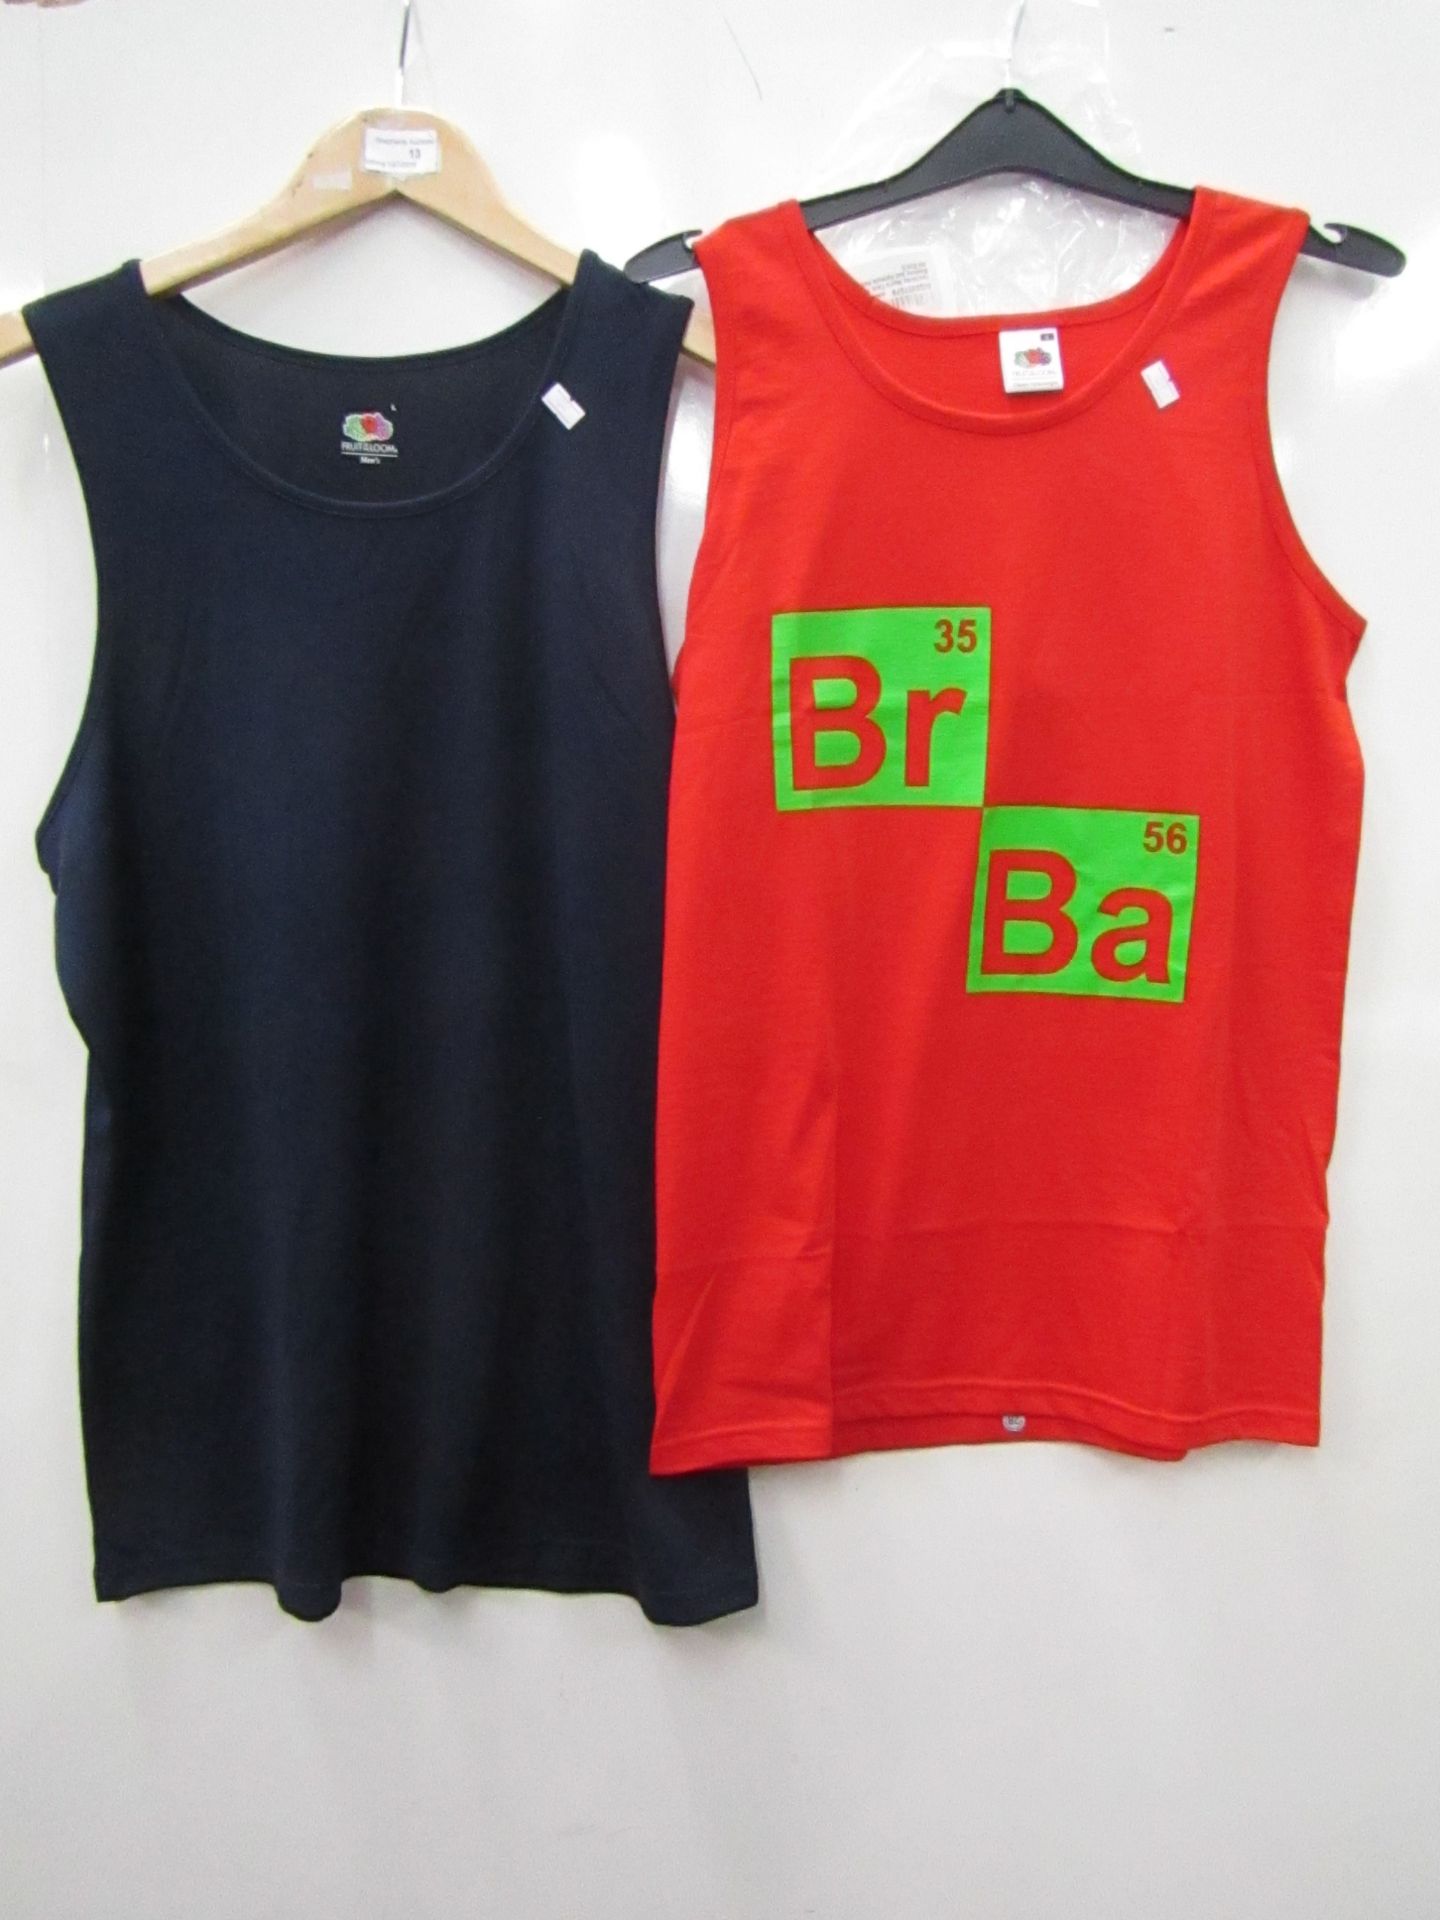 2 x Fruit of the Loom Tank Tops new 1 size S & 1 x size L